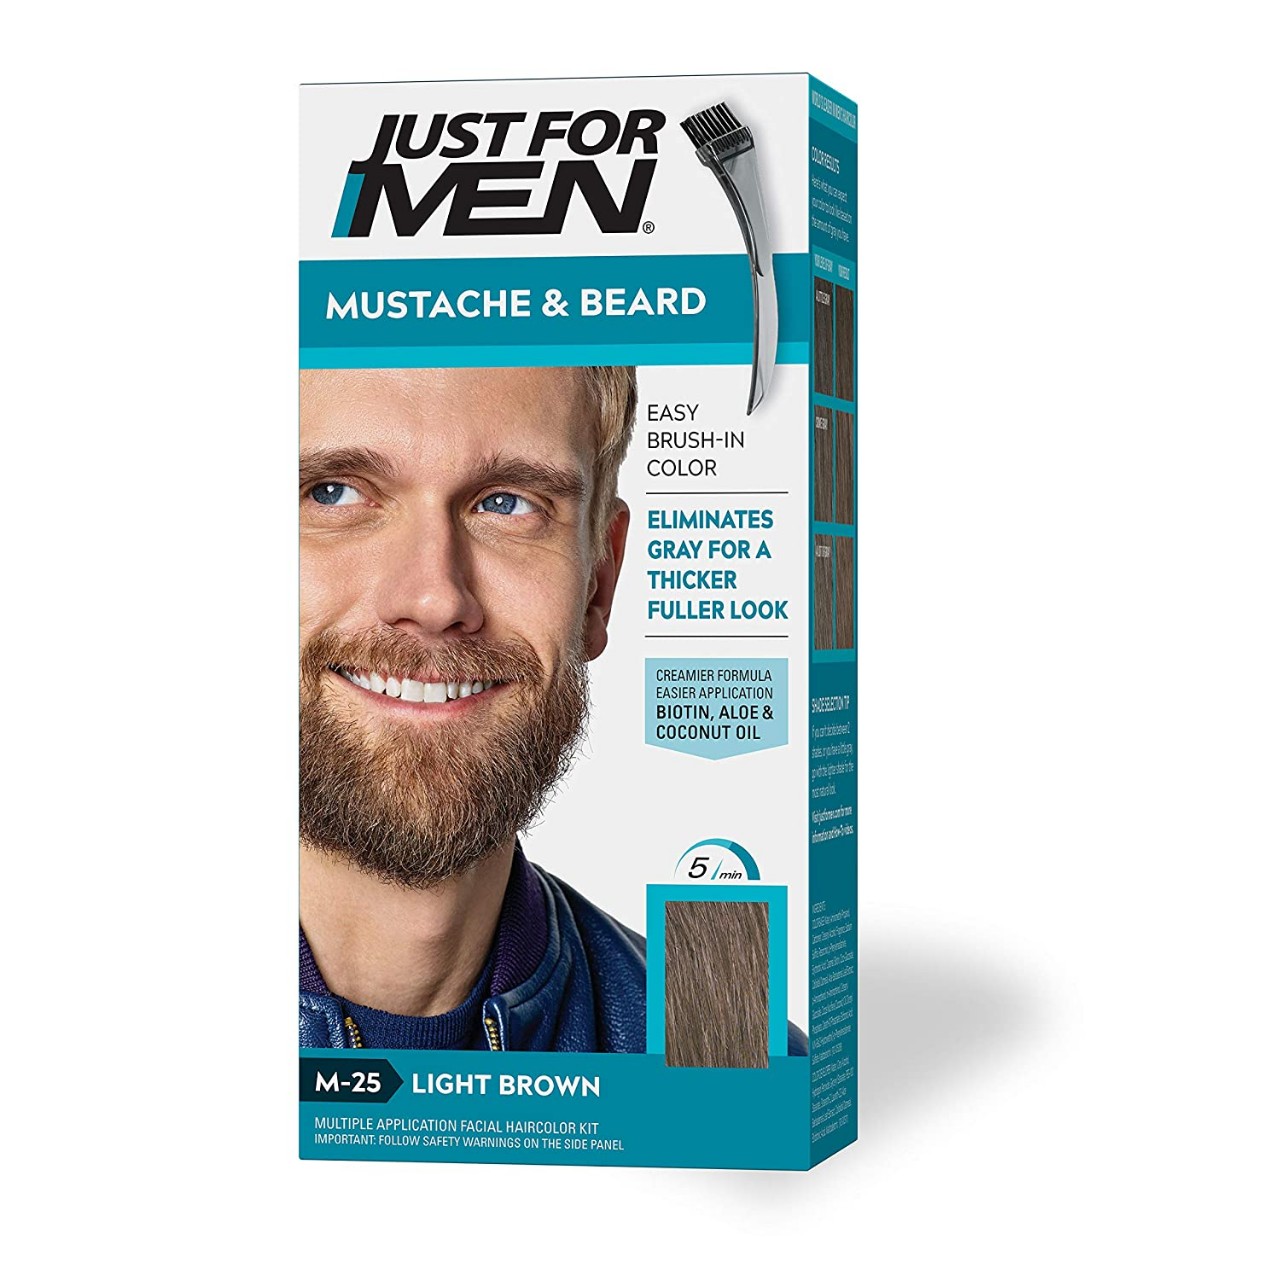 Just For Men Mustache & Beard, Beard Coloring for Gray Hair with Brush Included - Color: Light Brown